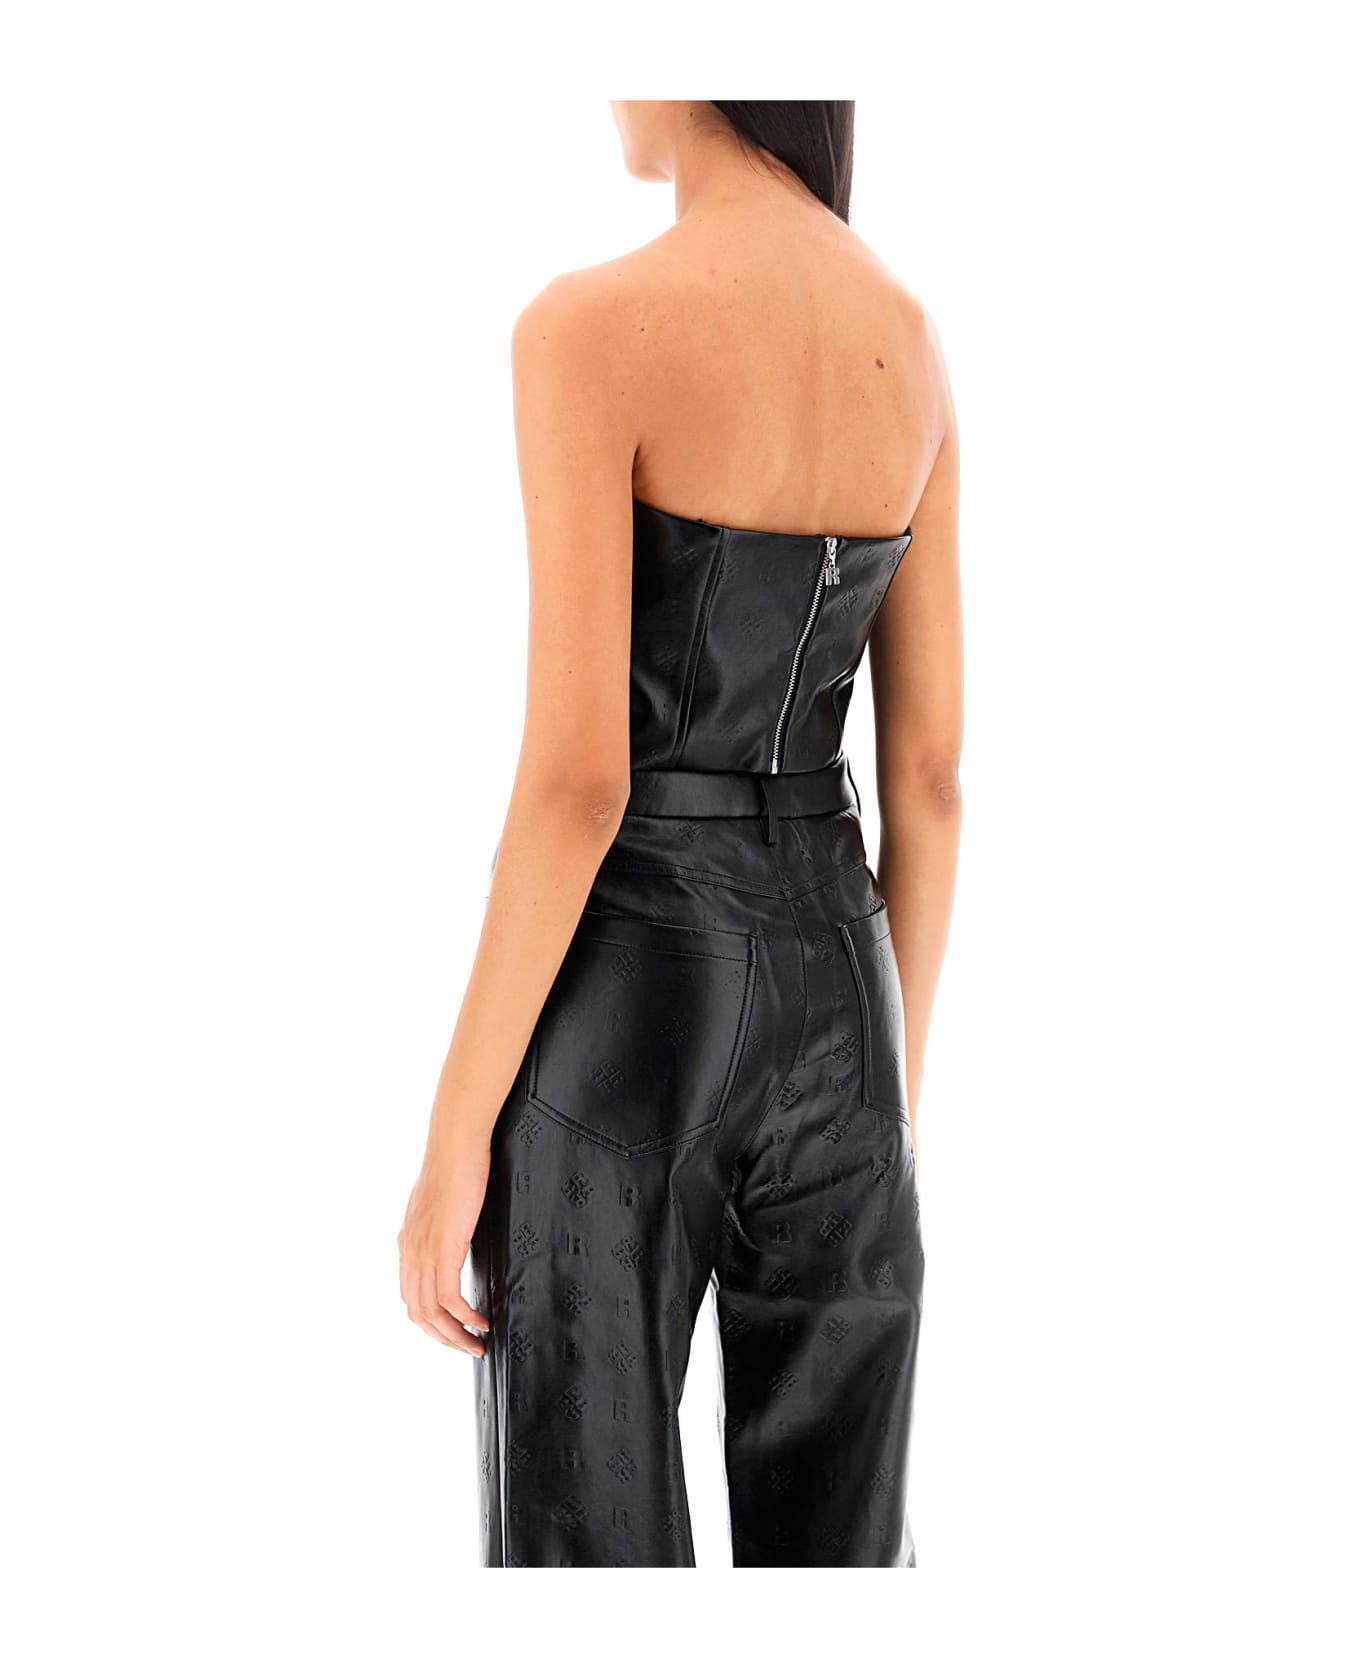 Rotate by Birger Christensen Faux-leather Cropped Top - BLACK (Black)